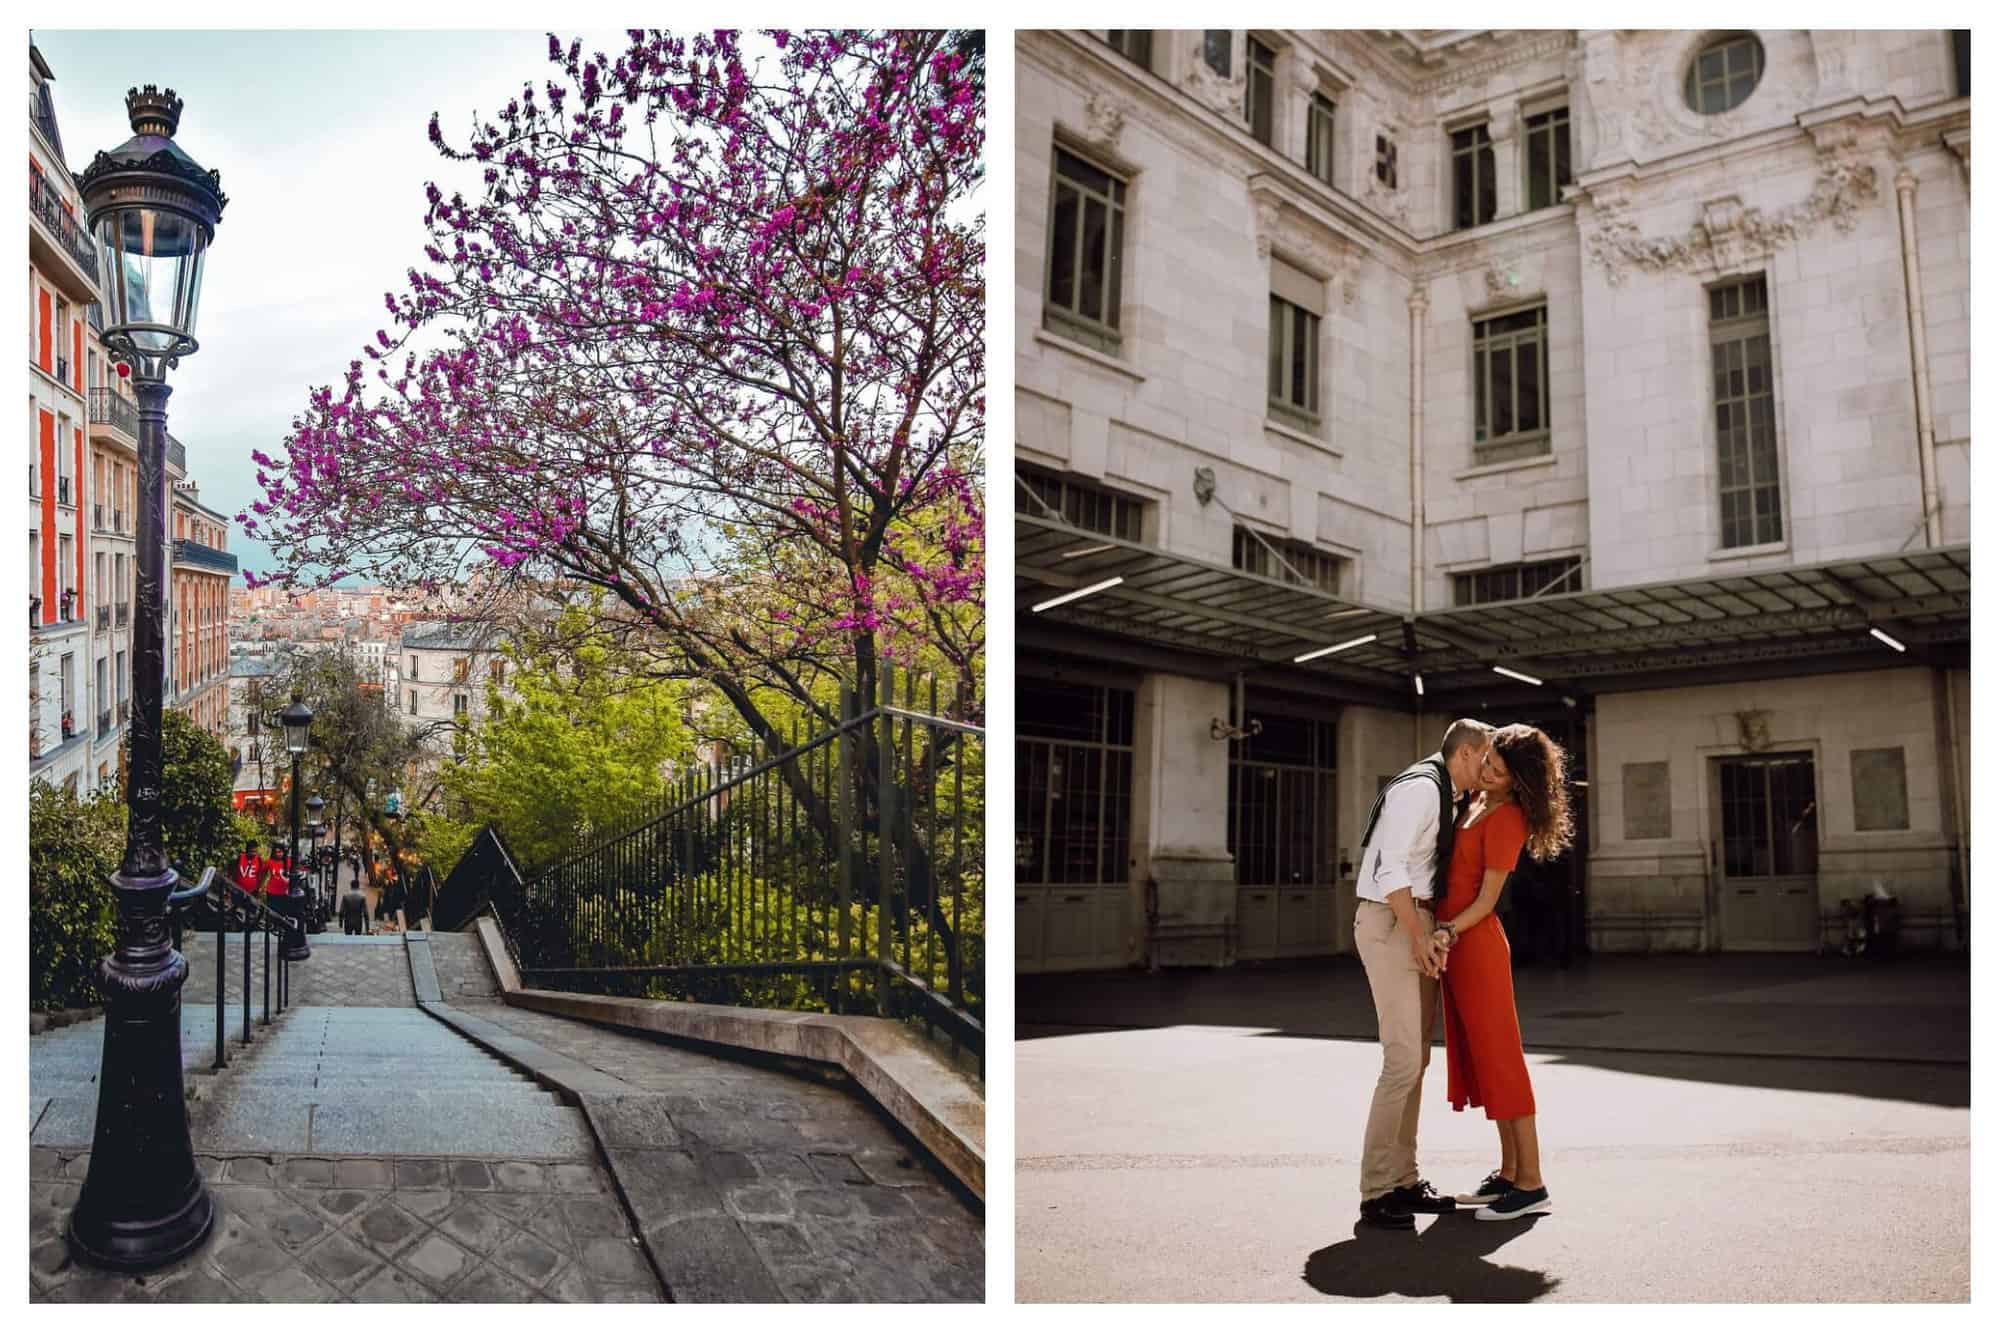 Left: A staircase in Montmartre with pink flowers blooming from a tree. Right: A man kisses a woman in the neck in front of a building.